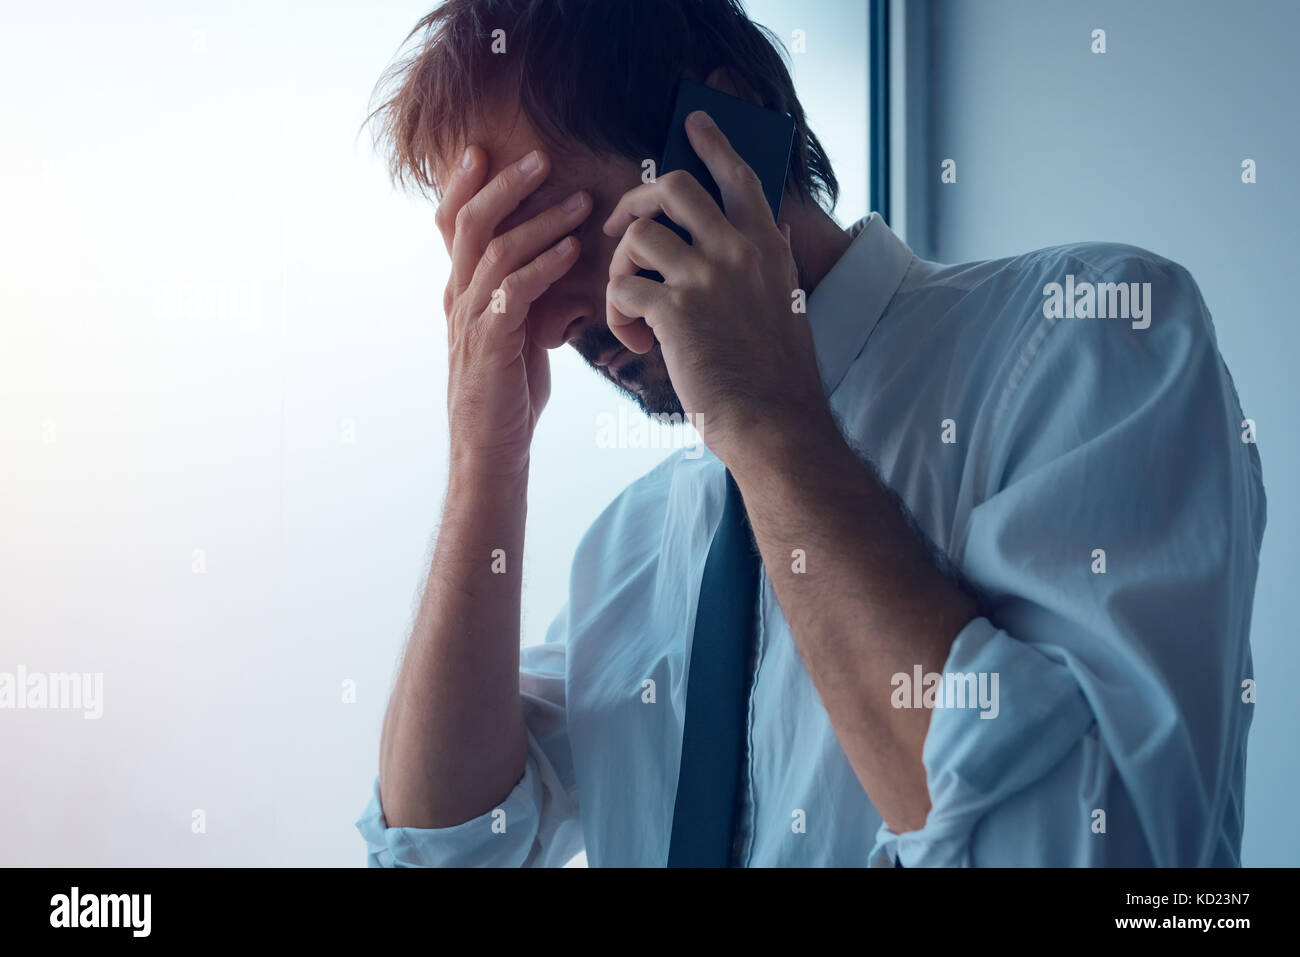 Businessman standing next to office window and using smartphone. Business communication over sms messages or mobile apps. Business person received bad Stock Photo